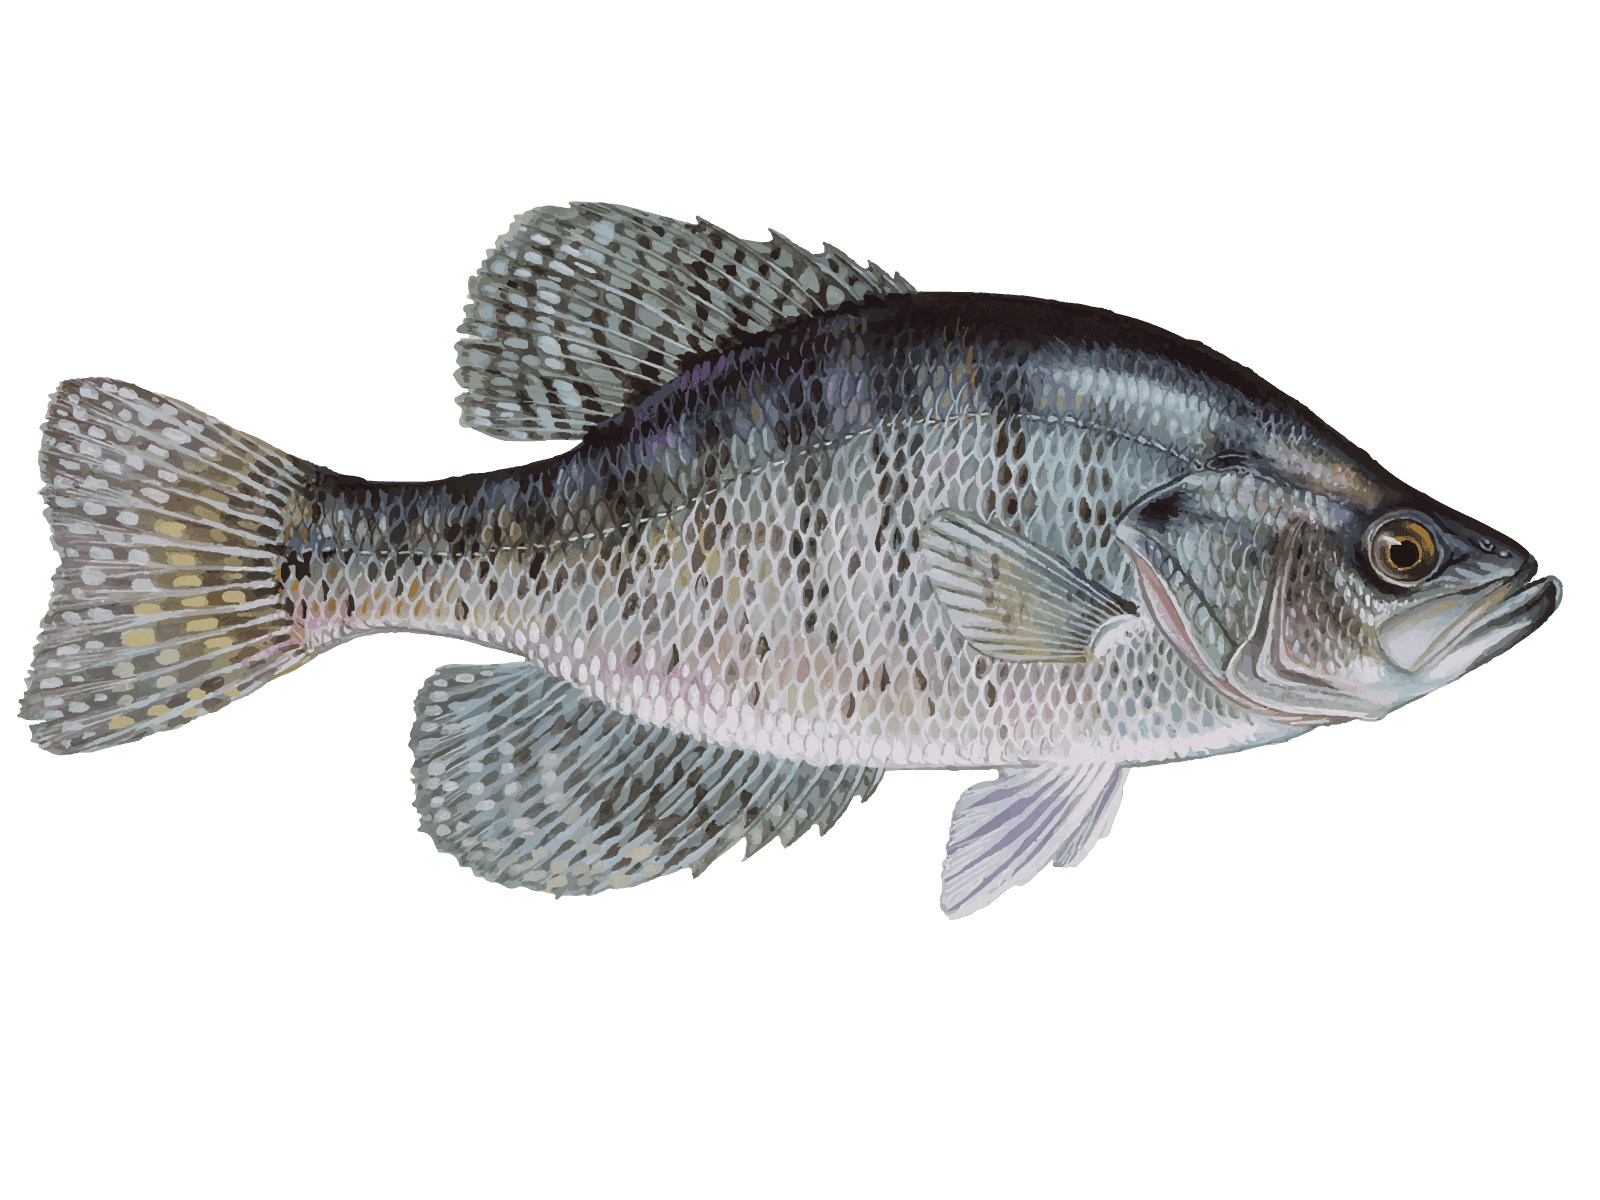 Black Crappie Images Browse 265 Stock Photos  Vectors Free Download with  Trial  Shutterstock